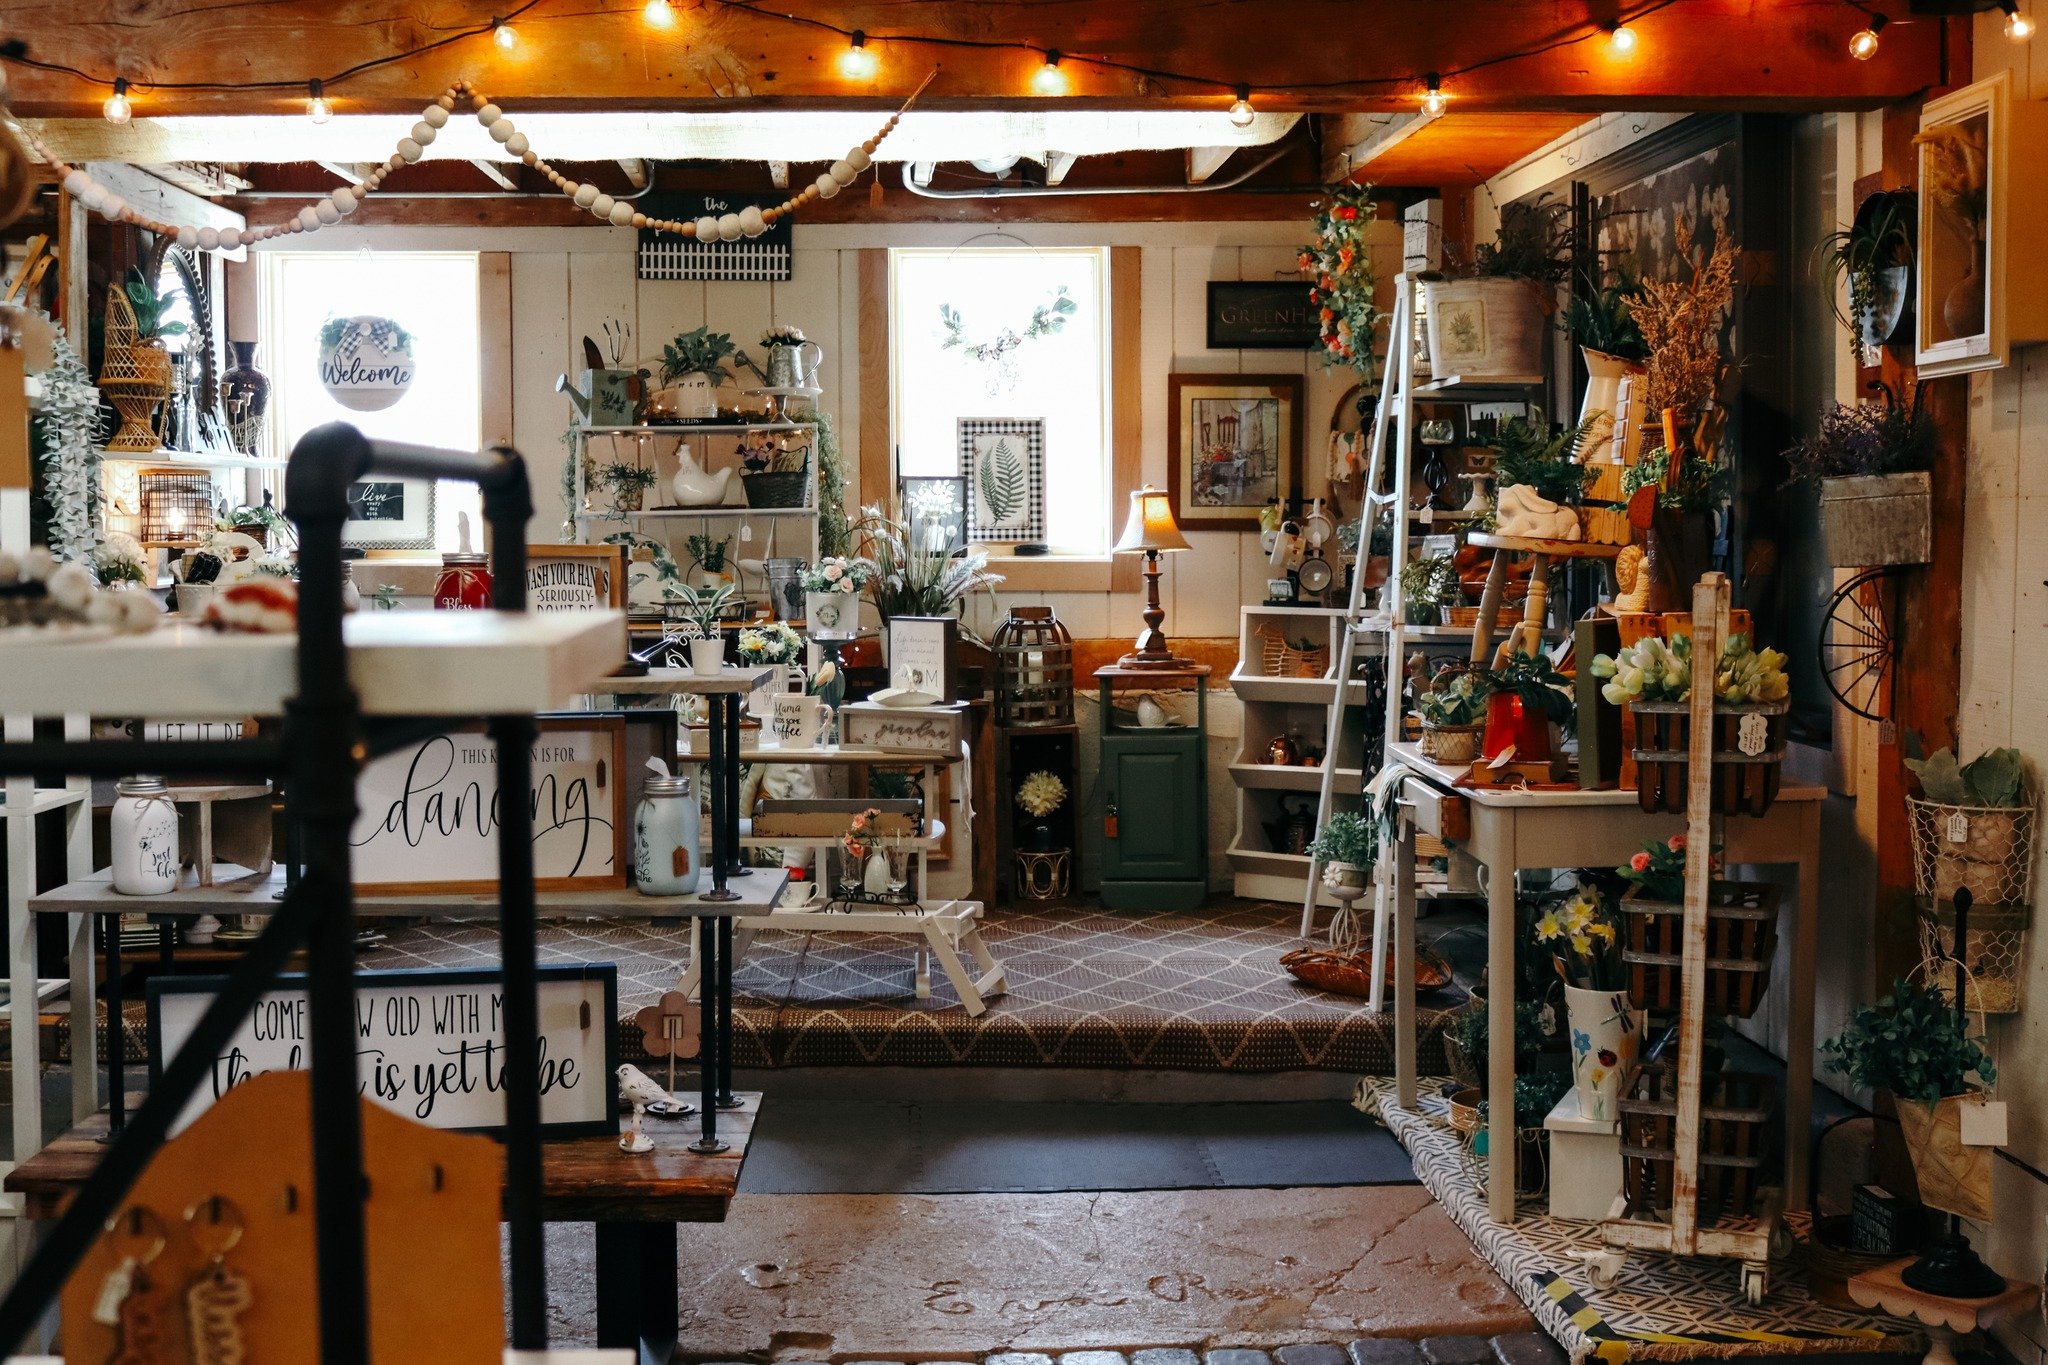 GIFT CERTIFICATES ARE AVAILABLE!

Need a creative gift idea for your friend or family member? How about a @prestigecreativemarkets gift certificate?! They'll be able to browse our 8,000 square foot rustic market featuring a ton of talented small shop